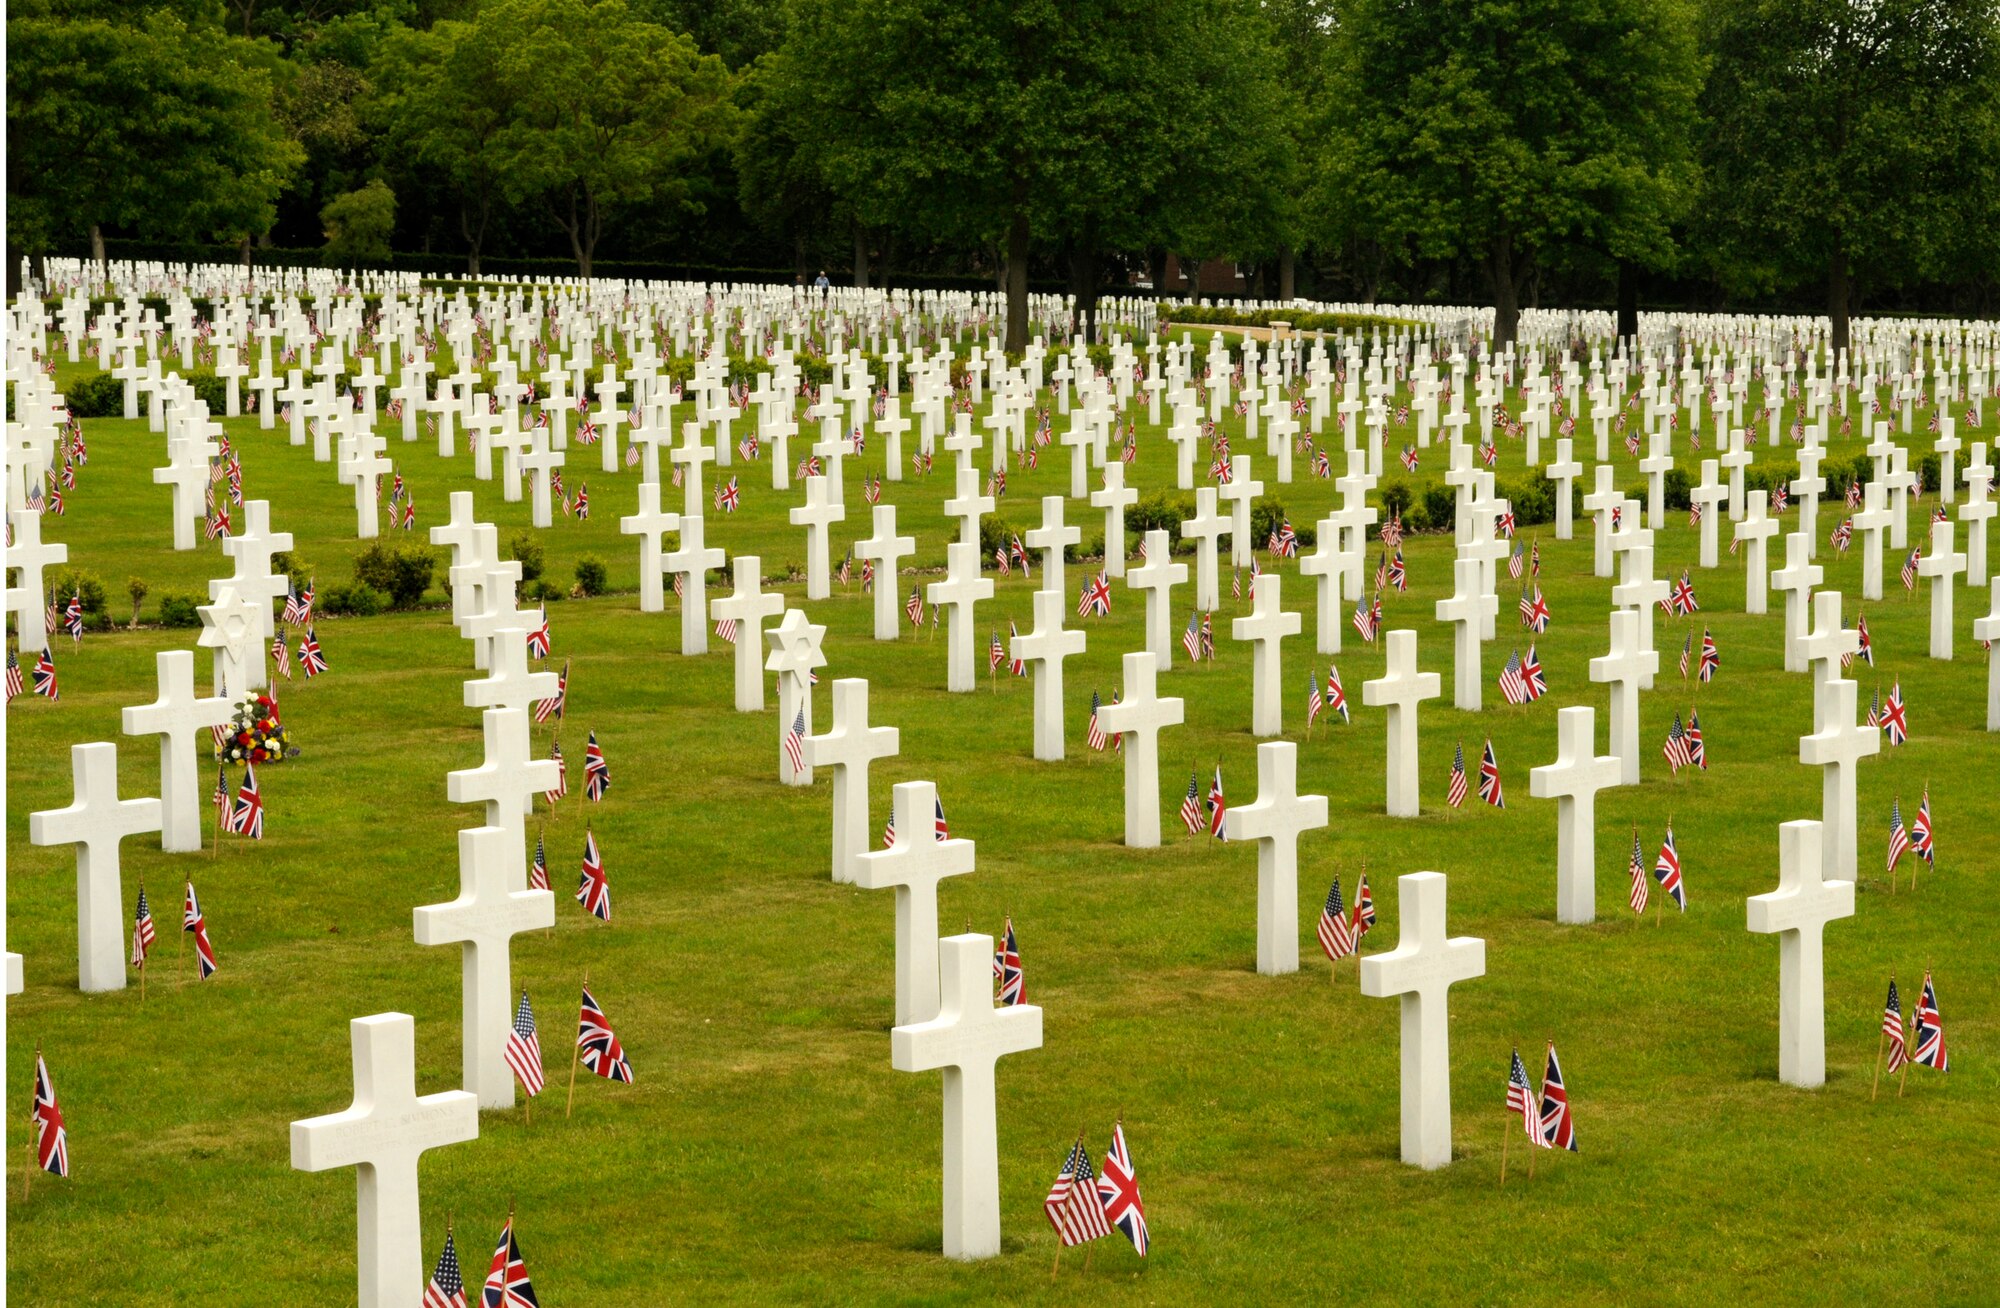 A ceremony is held on Memorial Day, May 25, 2009, to honor the thousands of American veterans laid to rest here at Madingley Memorial Cemetery.  The ceremony included key note speakers, wreath laying and fly-overs with a KC-135 Stratotanker from RAF Mildenhall and F-15E Strike Eagles from RAF Lakenheath.  (U.S. Air Force photo by Senior Airman Christopher L. Ingersoll)